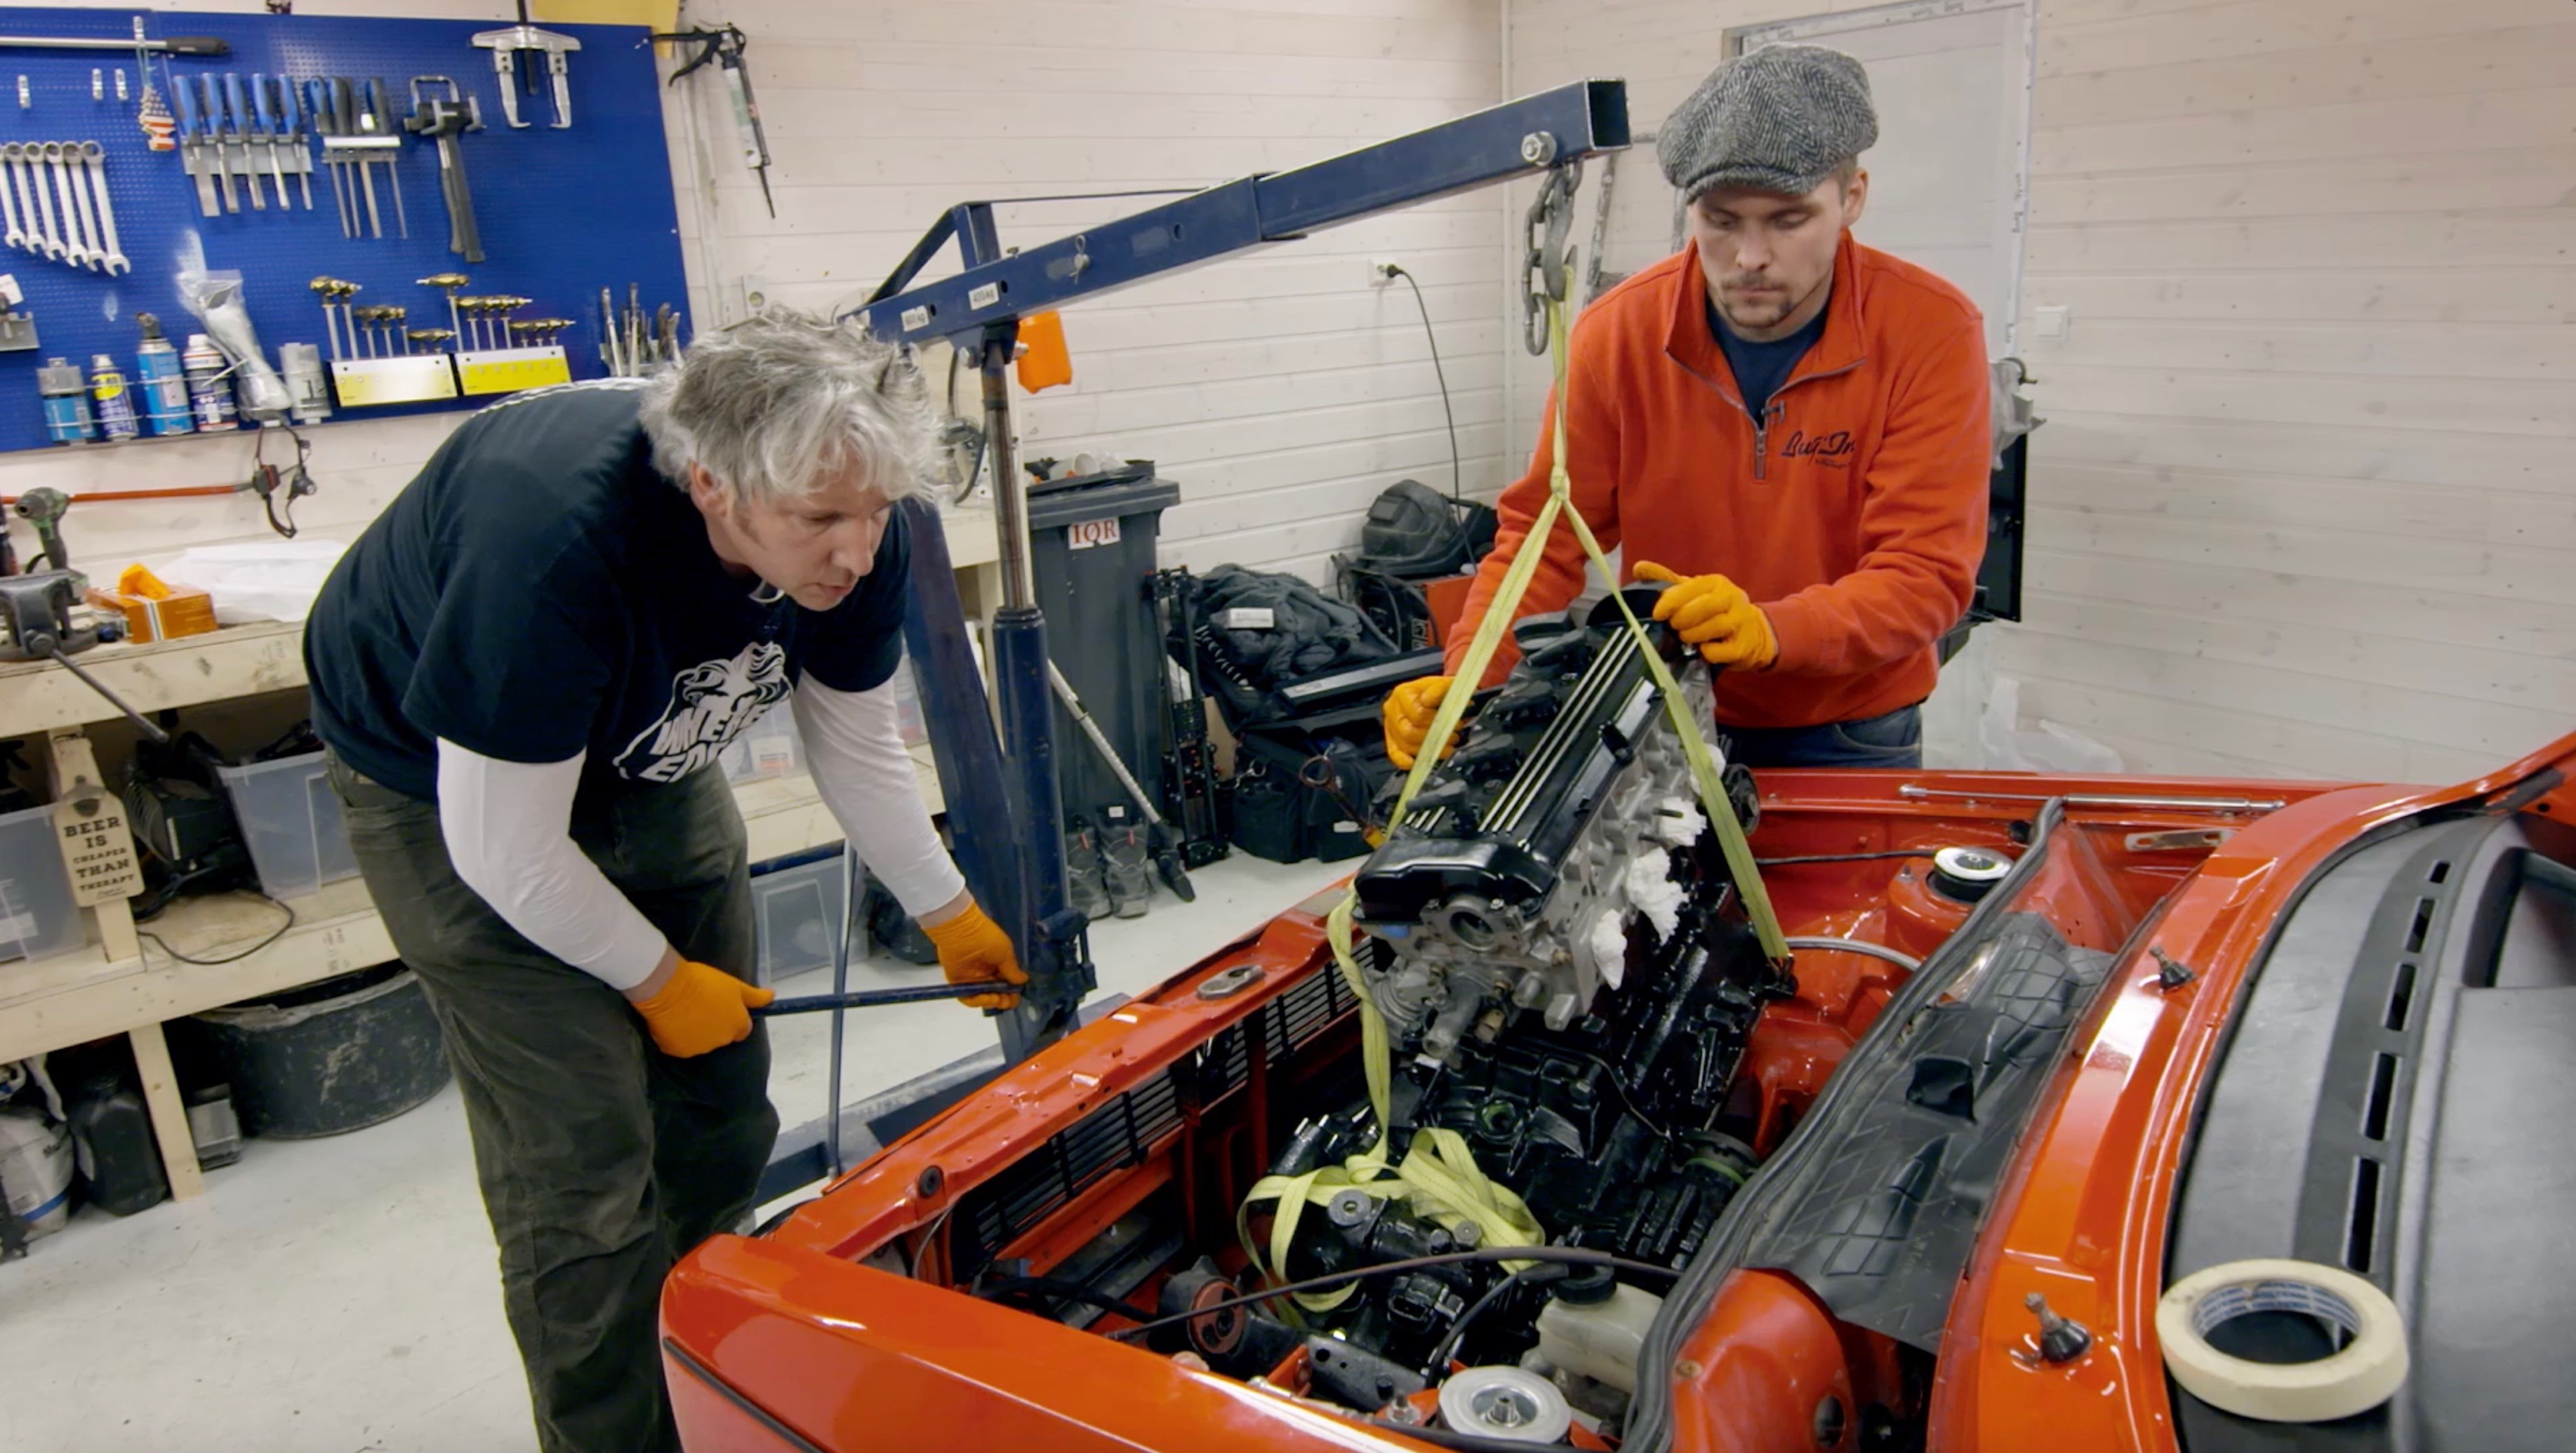 Edd China, The revival of a car, and of Edd China, ClassicCars.com Journal